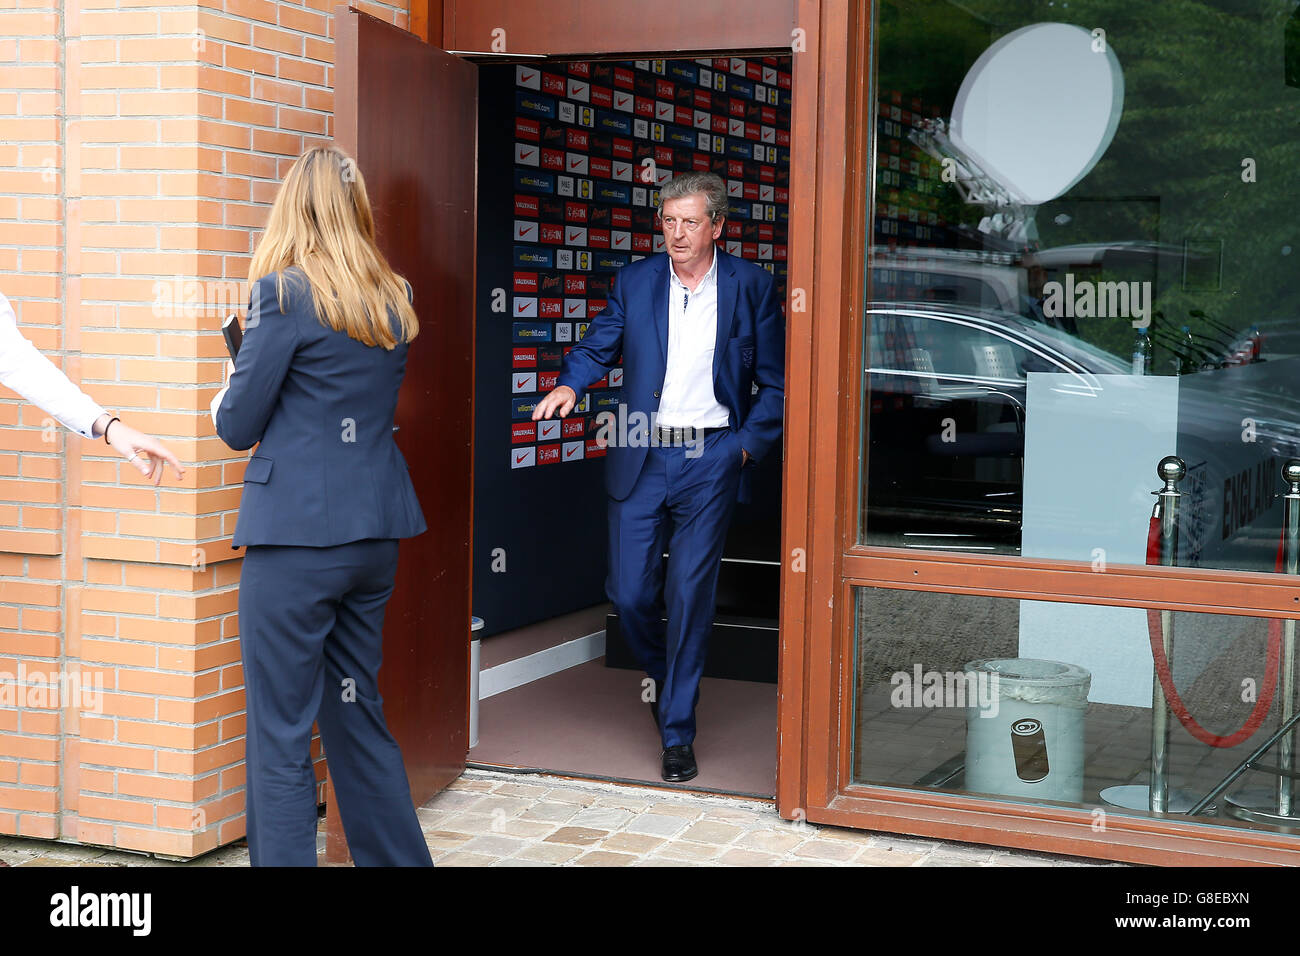 England manager Roy Hodgson after a press conference in Chantilly, France. England were knocked out at the round of 16 stage of the 2016 European Championships last night after losing 2-1 to Iceland. Stock Photo